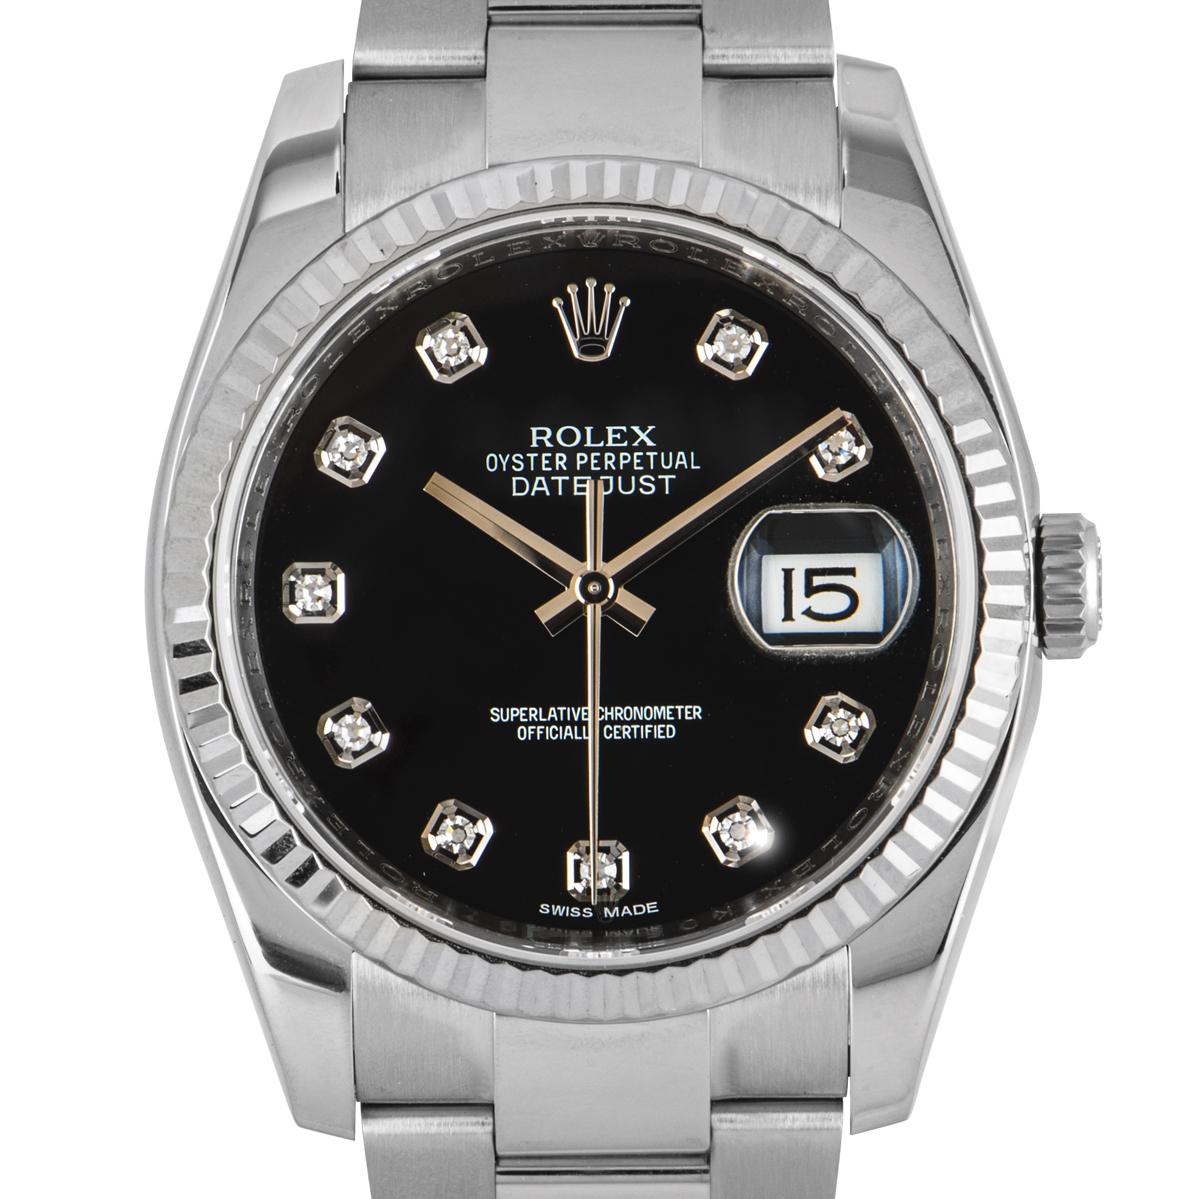 A mens Datejust by Rolex in stainless steel. Features a black dial with diamond hour markers and a fixed fluted white gold bezel. Equipped with an Oyster bracelet and deployant clasp. This piece is fitted with scratch-resistant sapphire crystal and